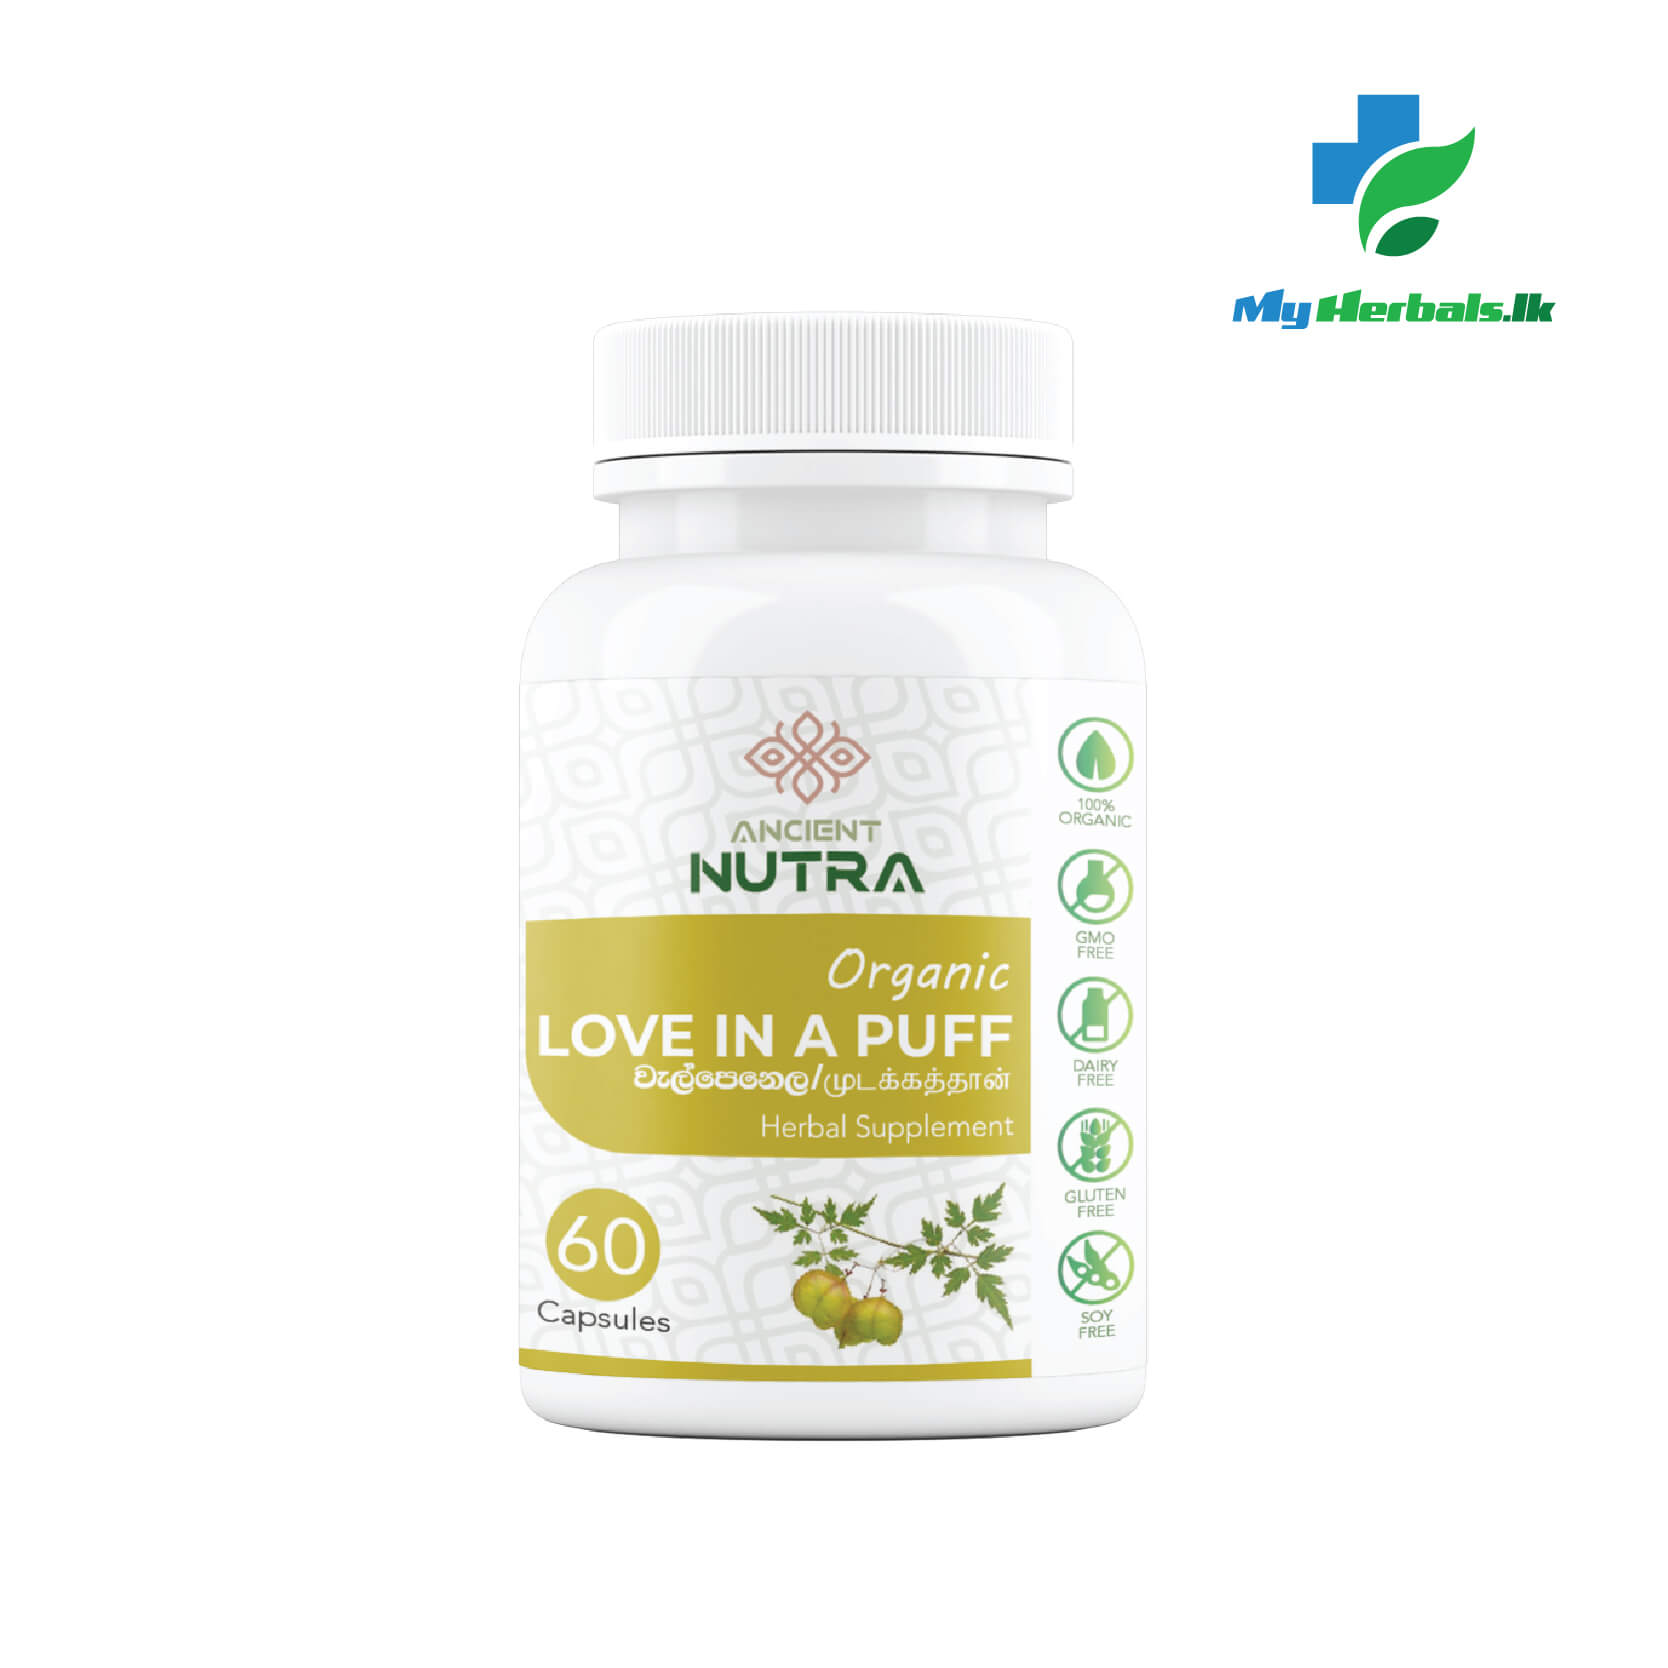 Love in a puff Capsules - 60 Caps- Ancient Nutra